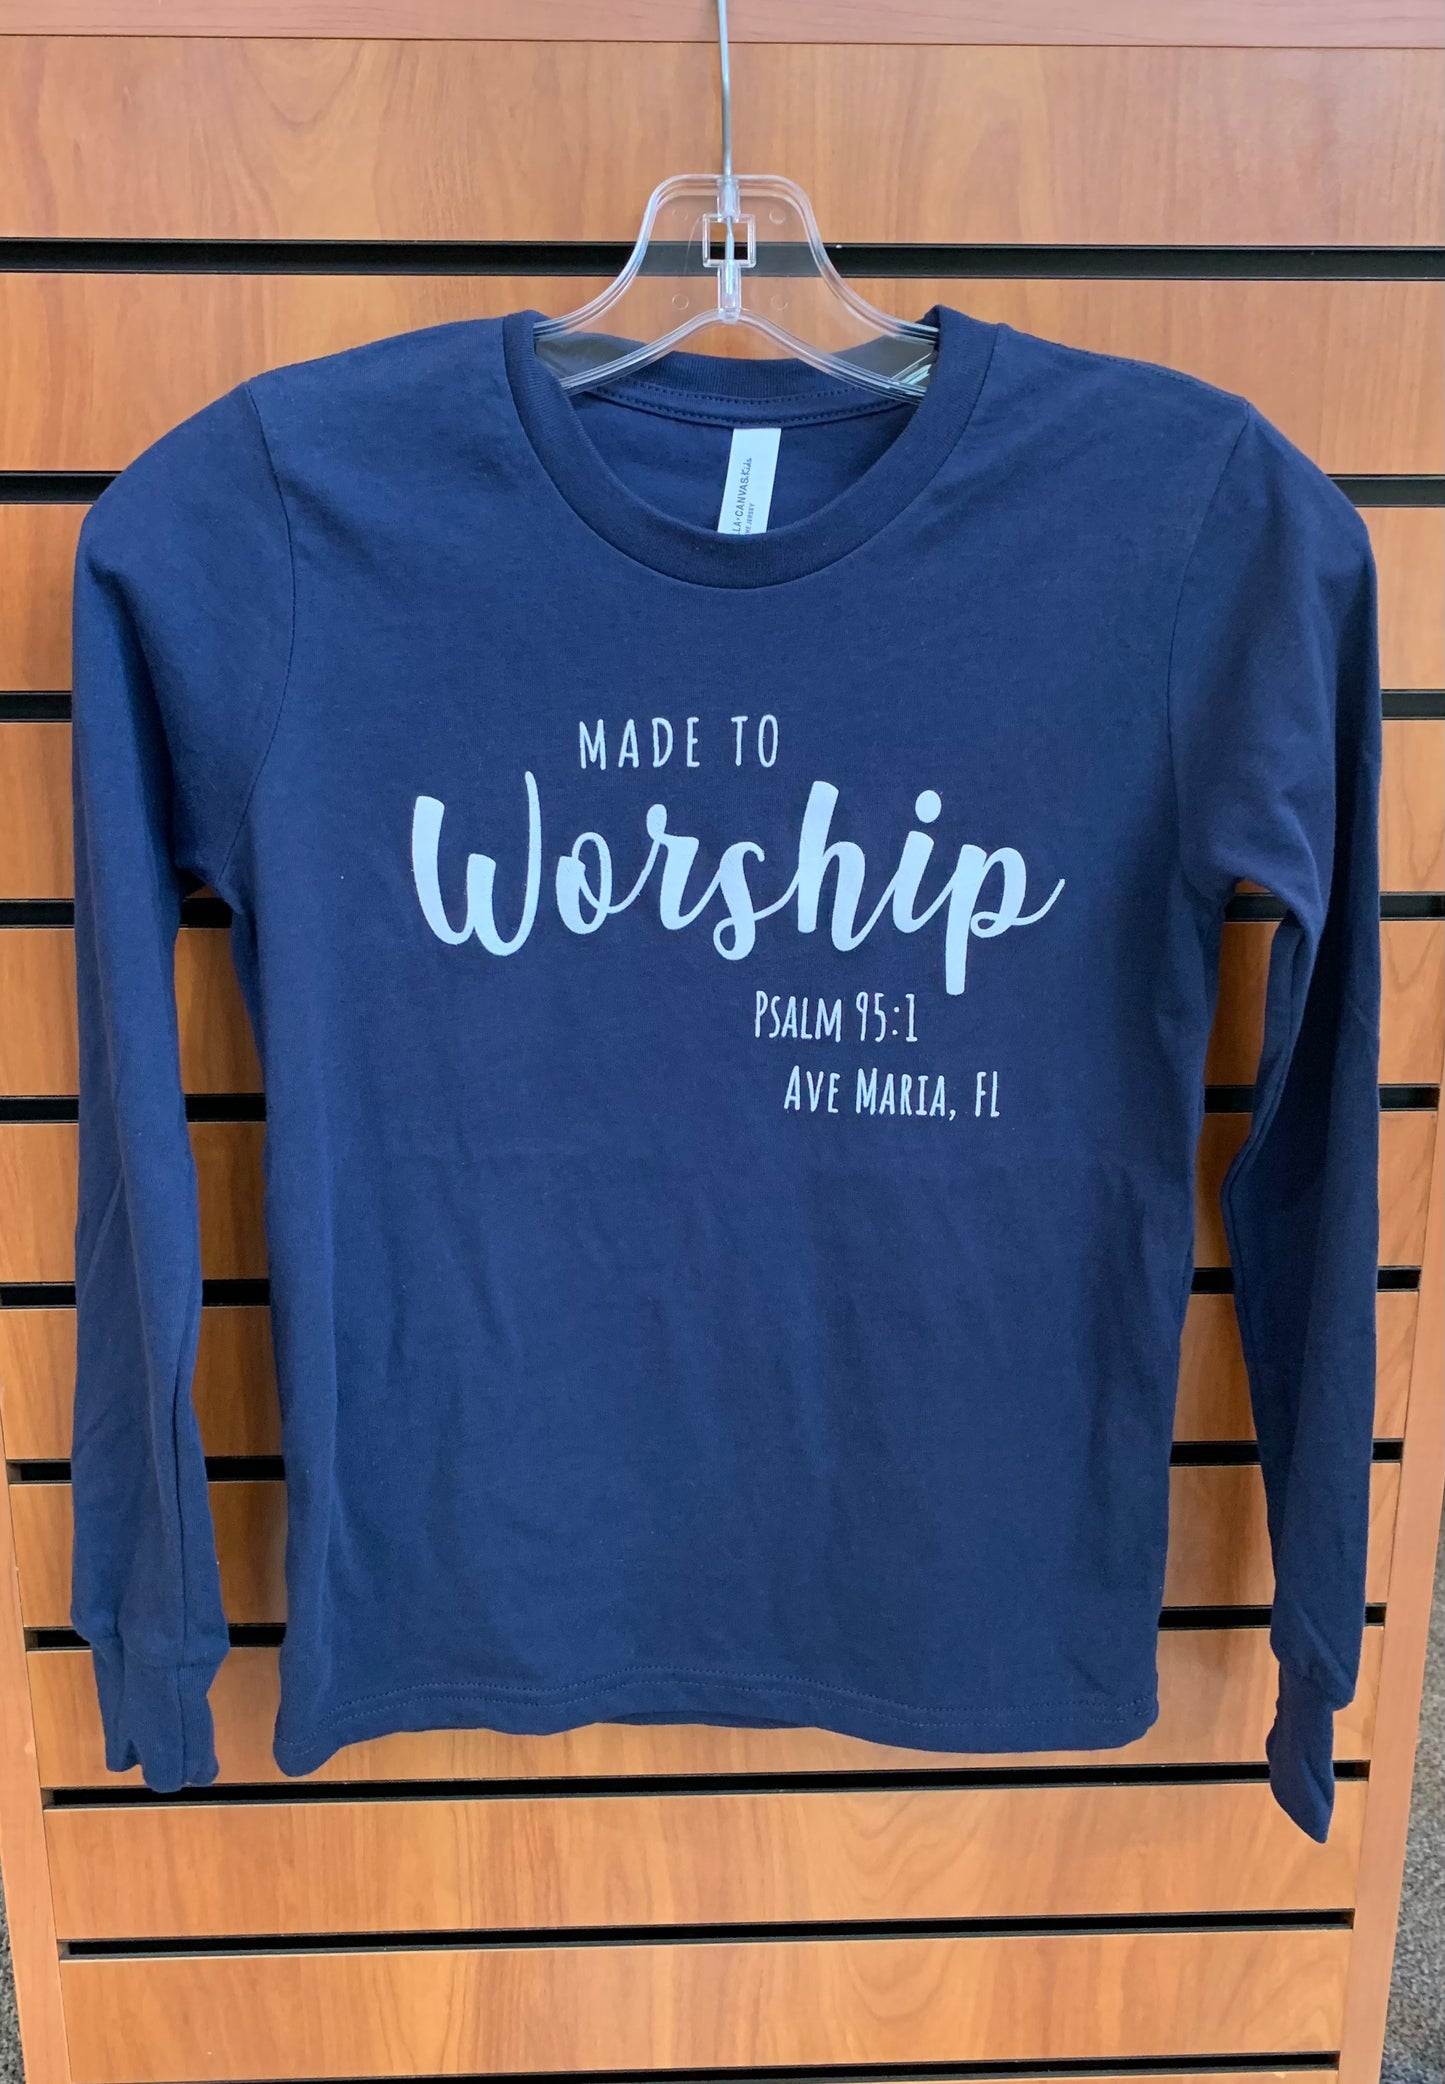 Made to Worship Ps 95:1- Navy Youth Long Sleeve Tee